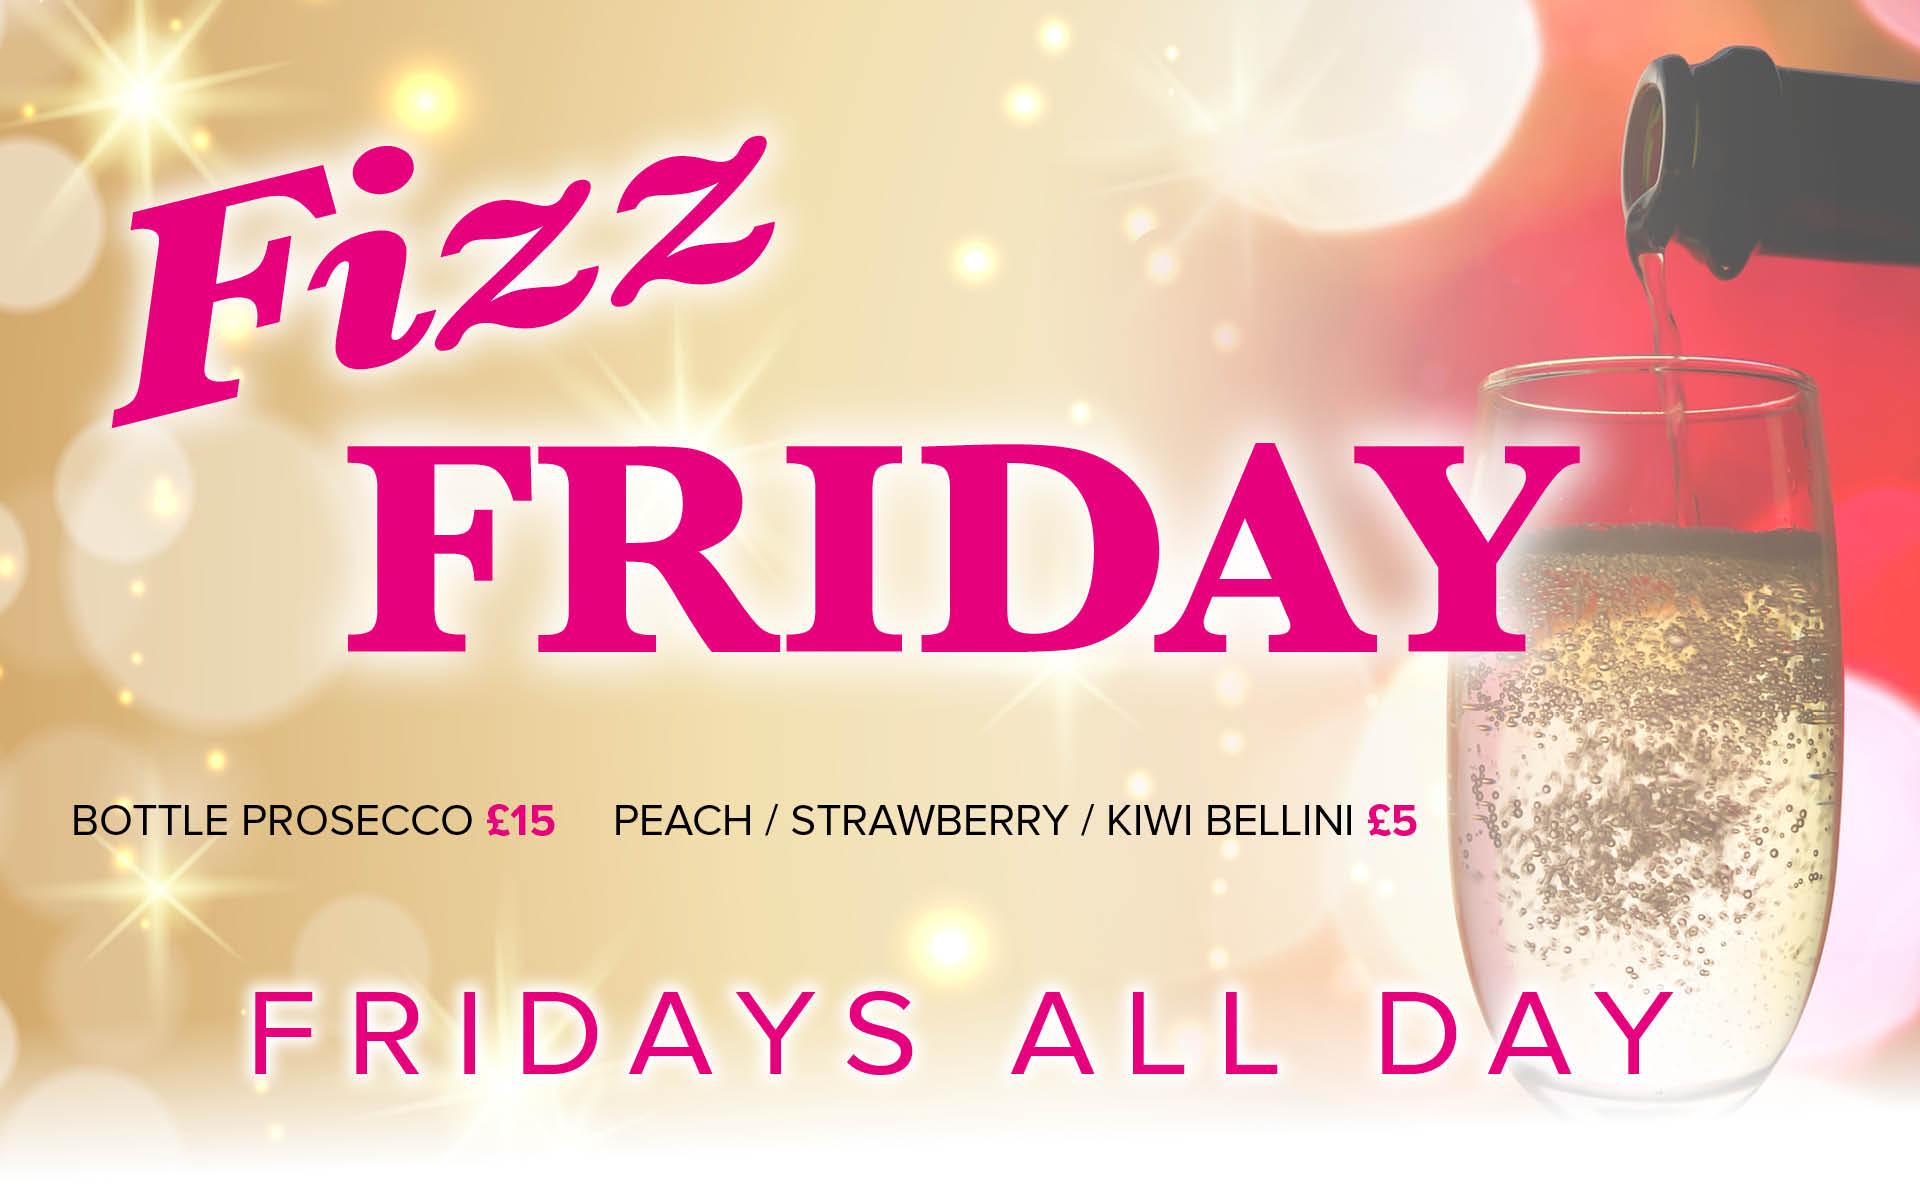 Friday fizz all day every week